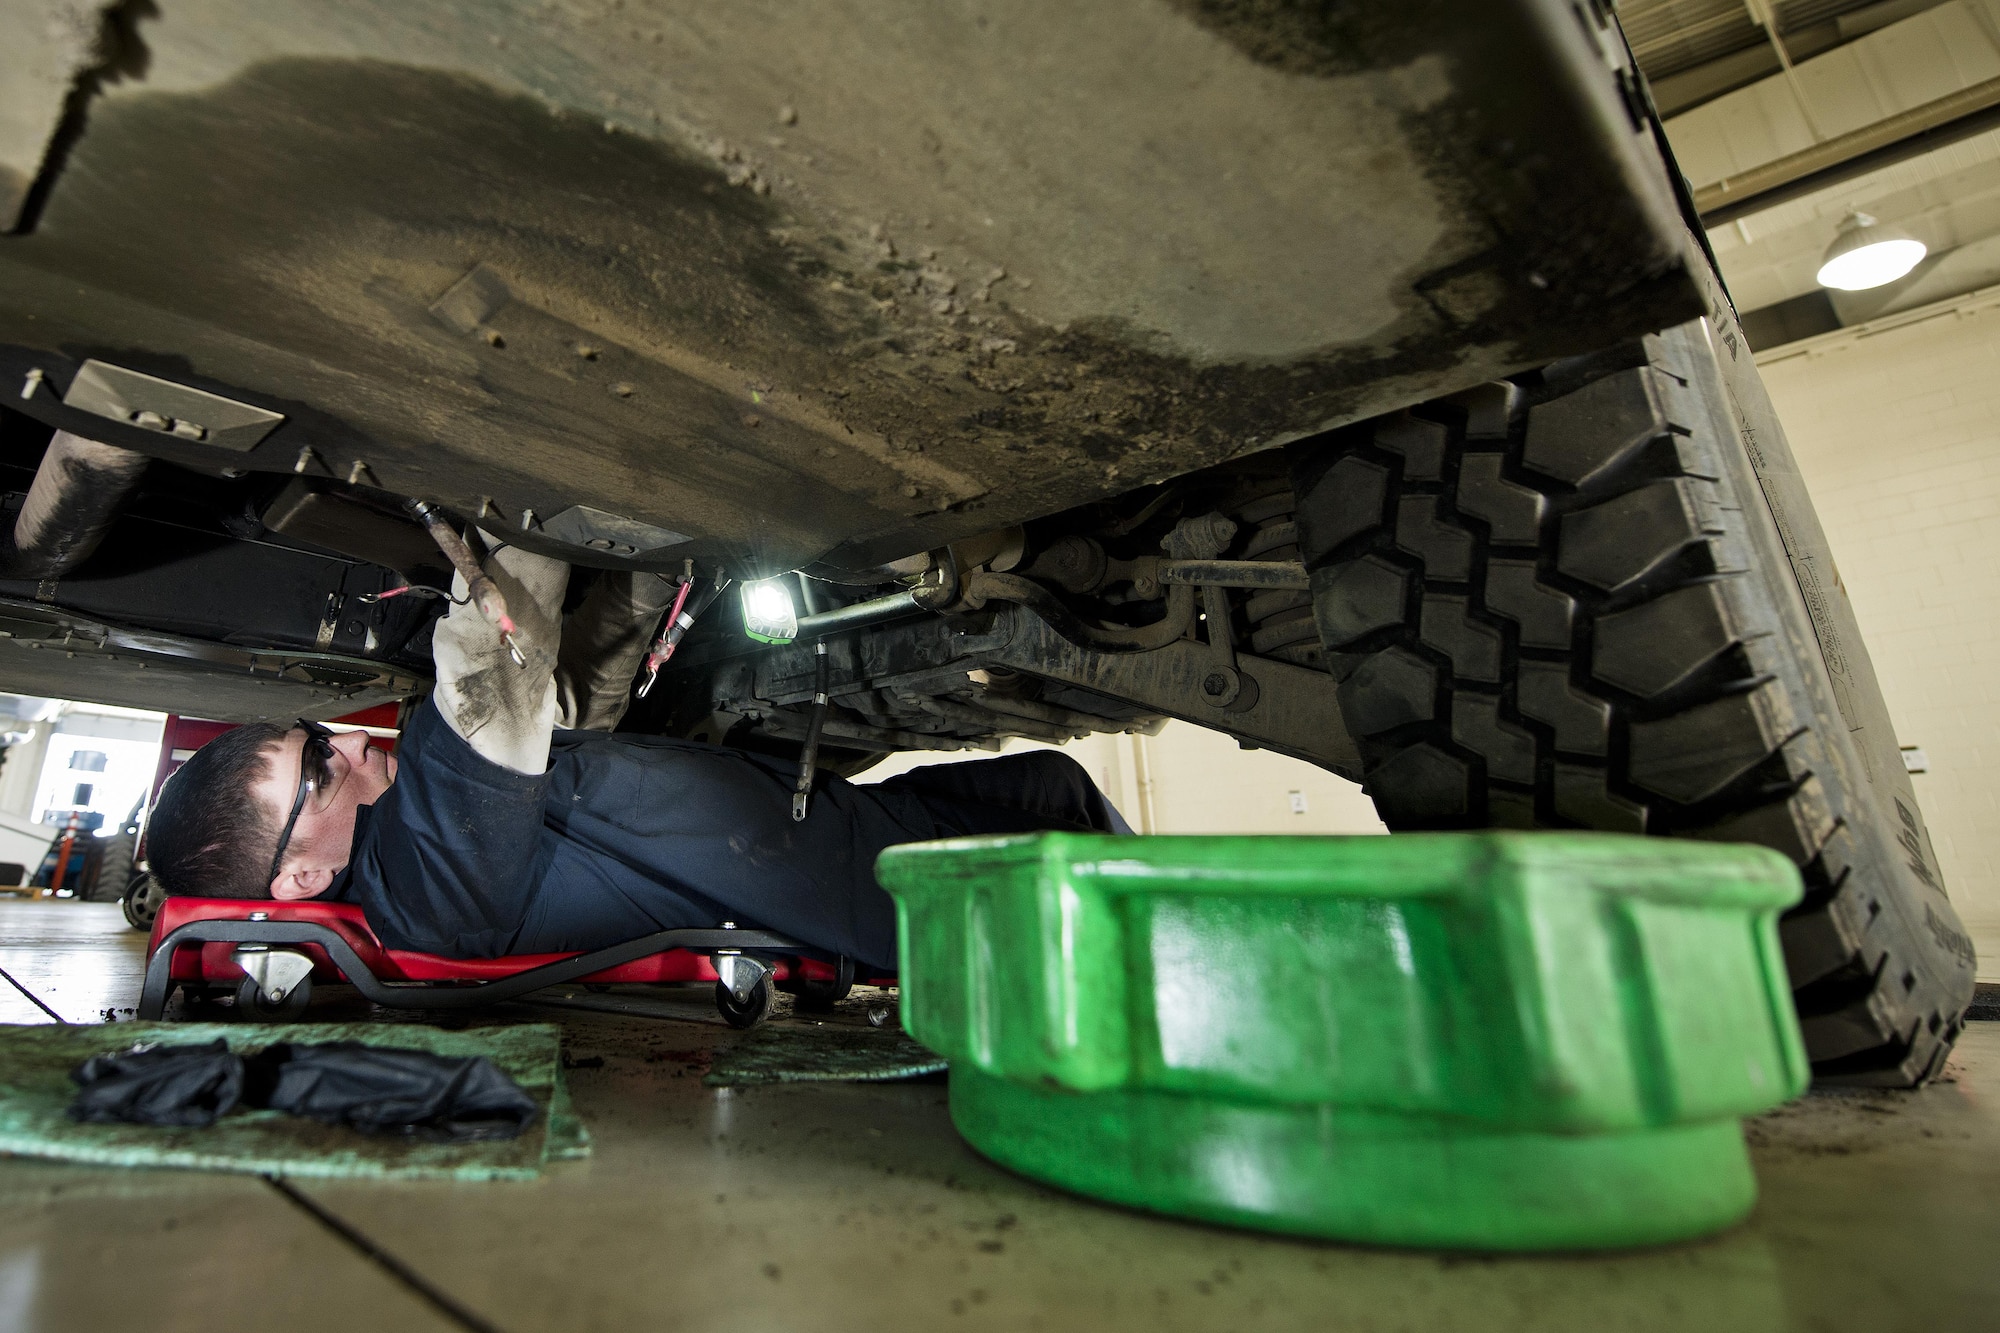 Senior Airman Brad Agner, 5th Logistics Readiness Squadron vehicle maintenance technician, works underneath a Humvee in the Defender Dome at Minot Air Force Base, N.D., July 28, 2016. Airmen from the 5th LRS vehicle maintenance flight work to ensure that Team Minot stays mobile. (U.S. Air Force photos/Airman 1st Class J.T. Armstrong)